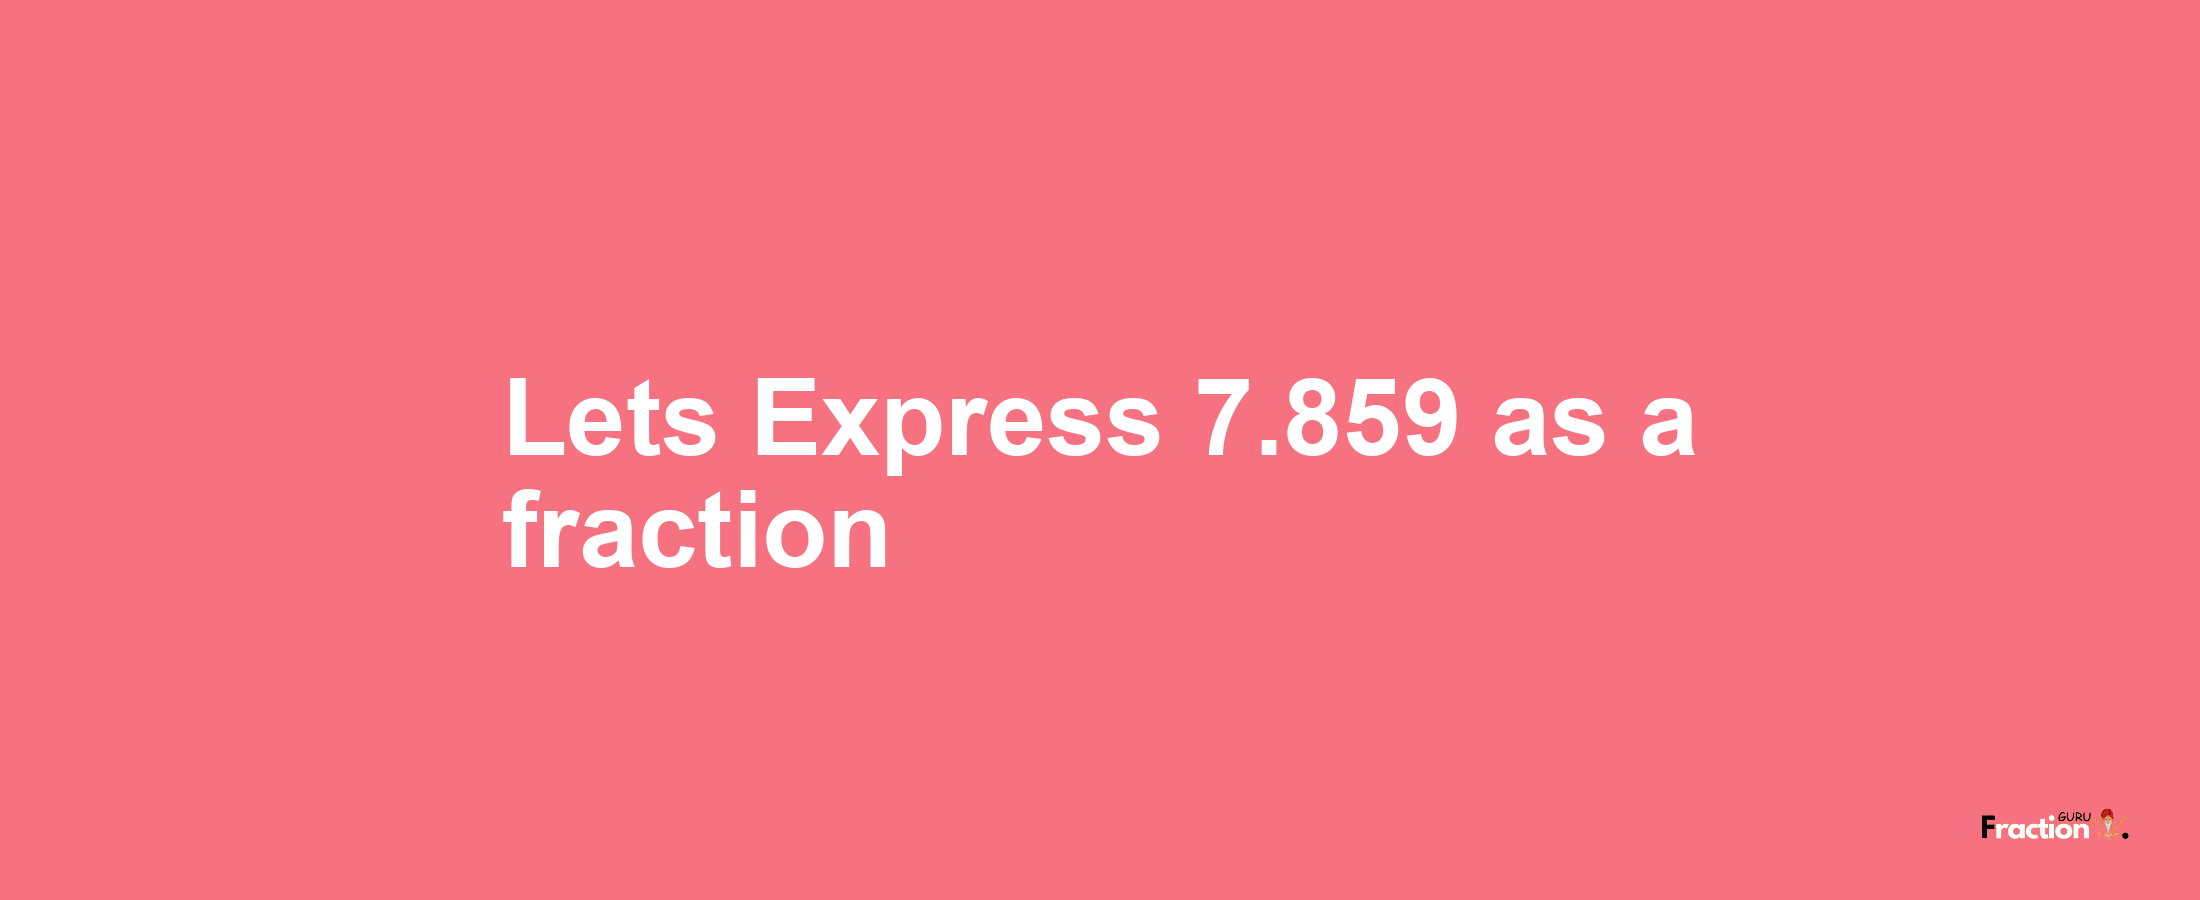 Lets Express 7.859 as afraction